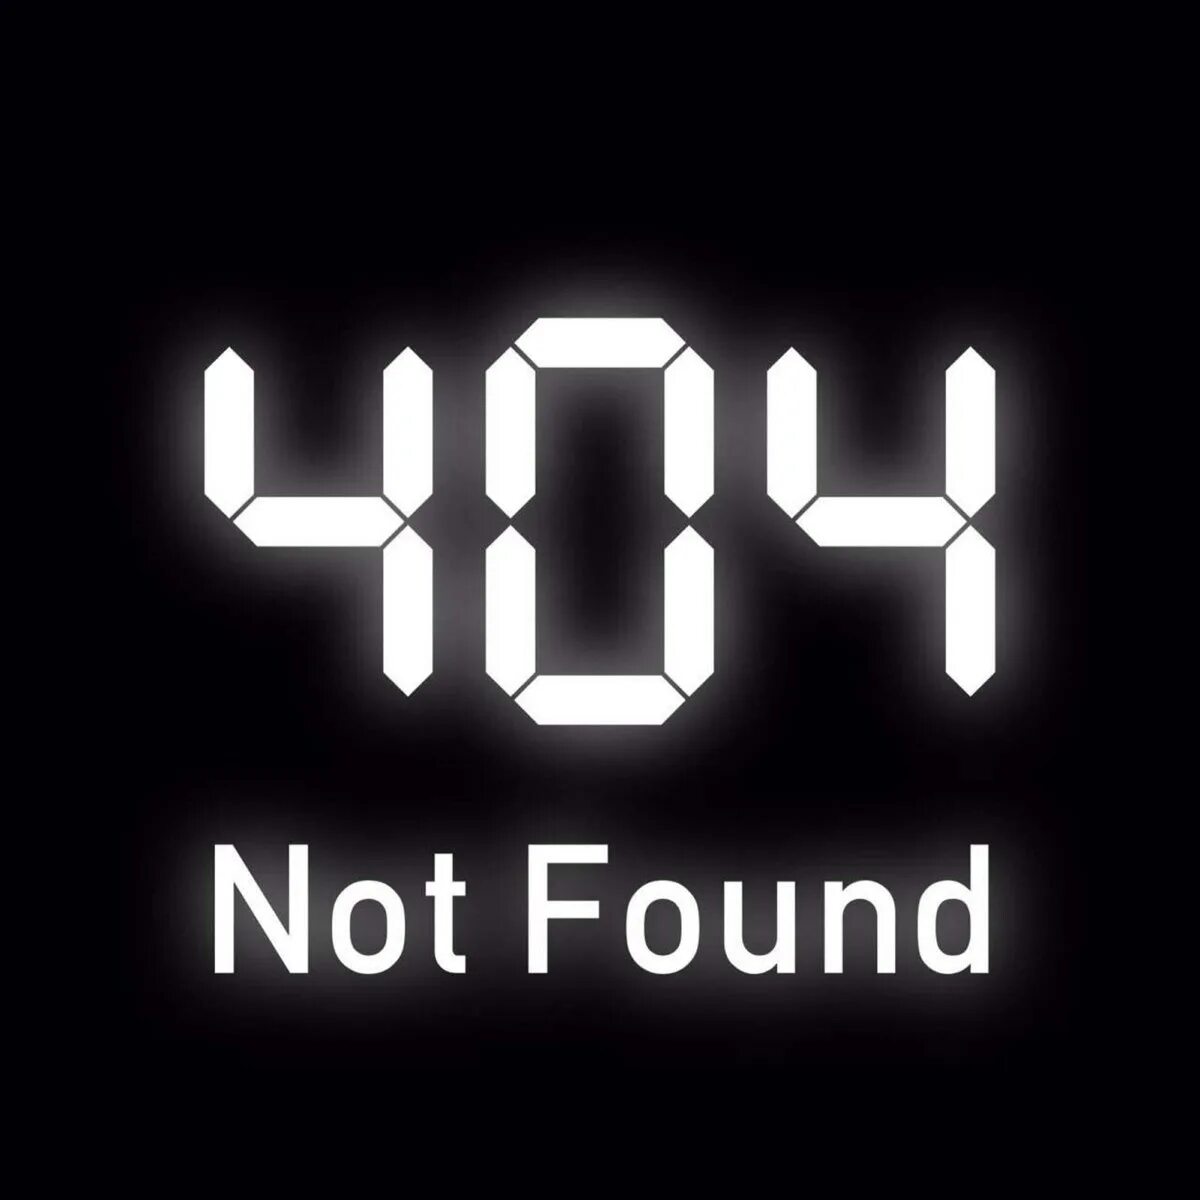 Not found. Error 404 not found. 404 Not found аватарка. 404 Нот фаунд. Shop not found